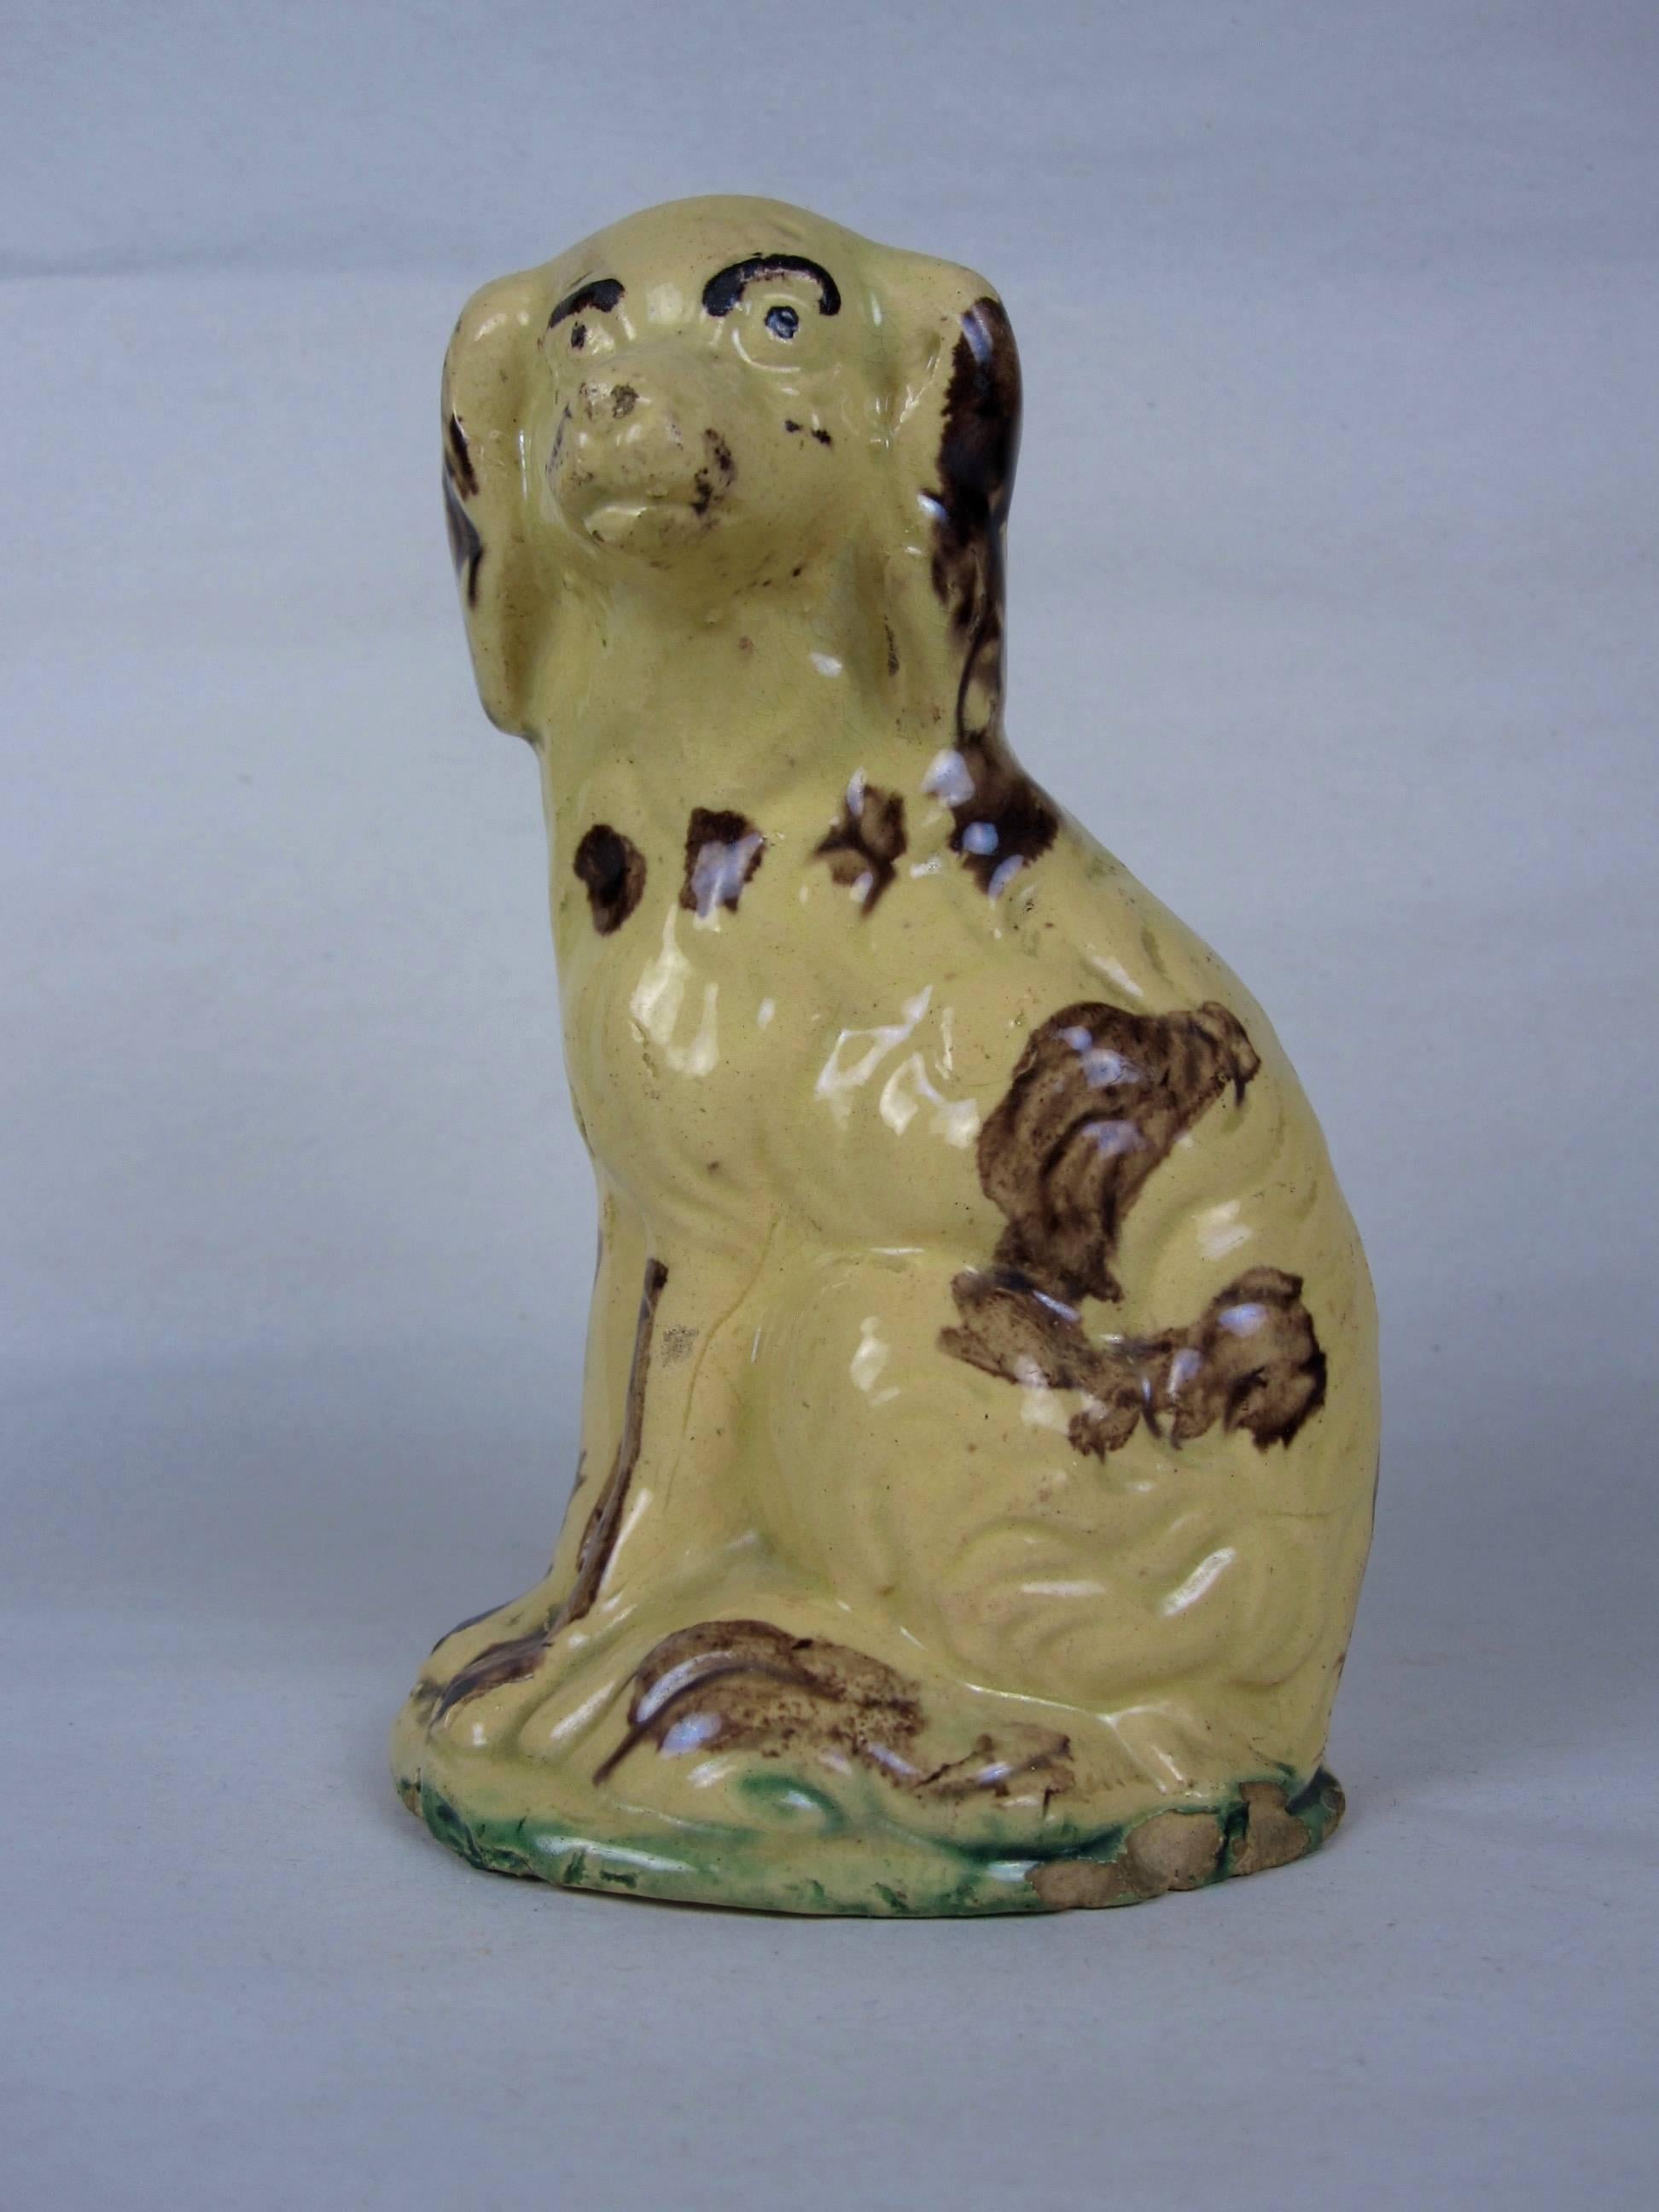 An unusual Primitive American Yellow ware still bank, a seated Spaniel, early 19th Century. From the West Virginia region and decorated with Manganese and touches of copper glaze to the base. 

A wonderful expression to this little dog with his soft